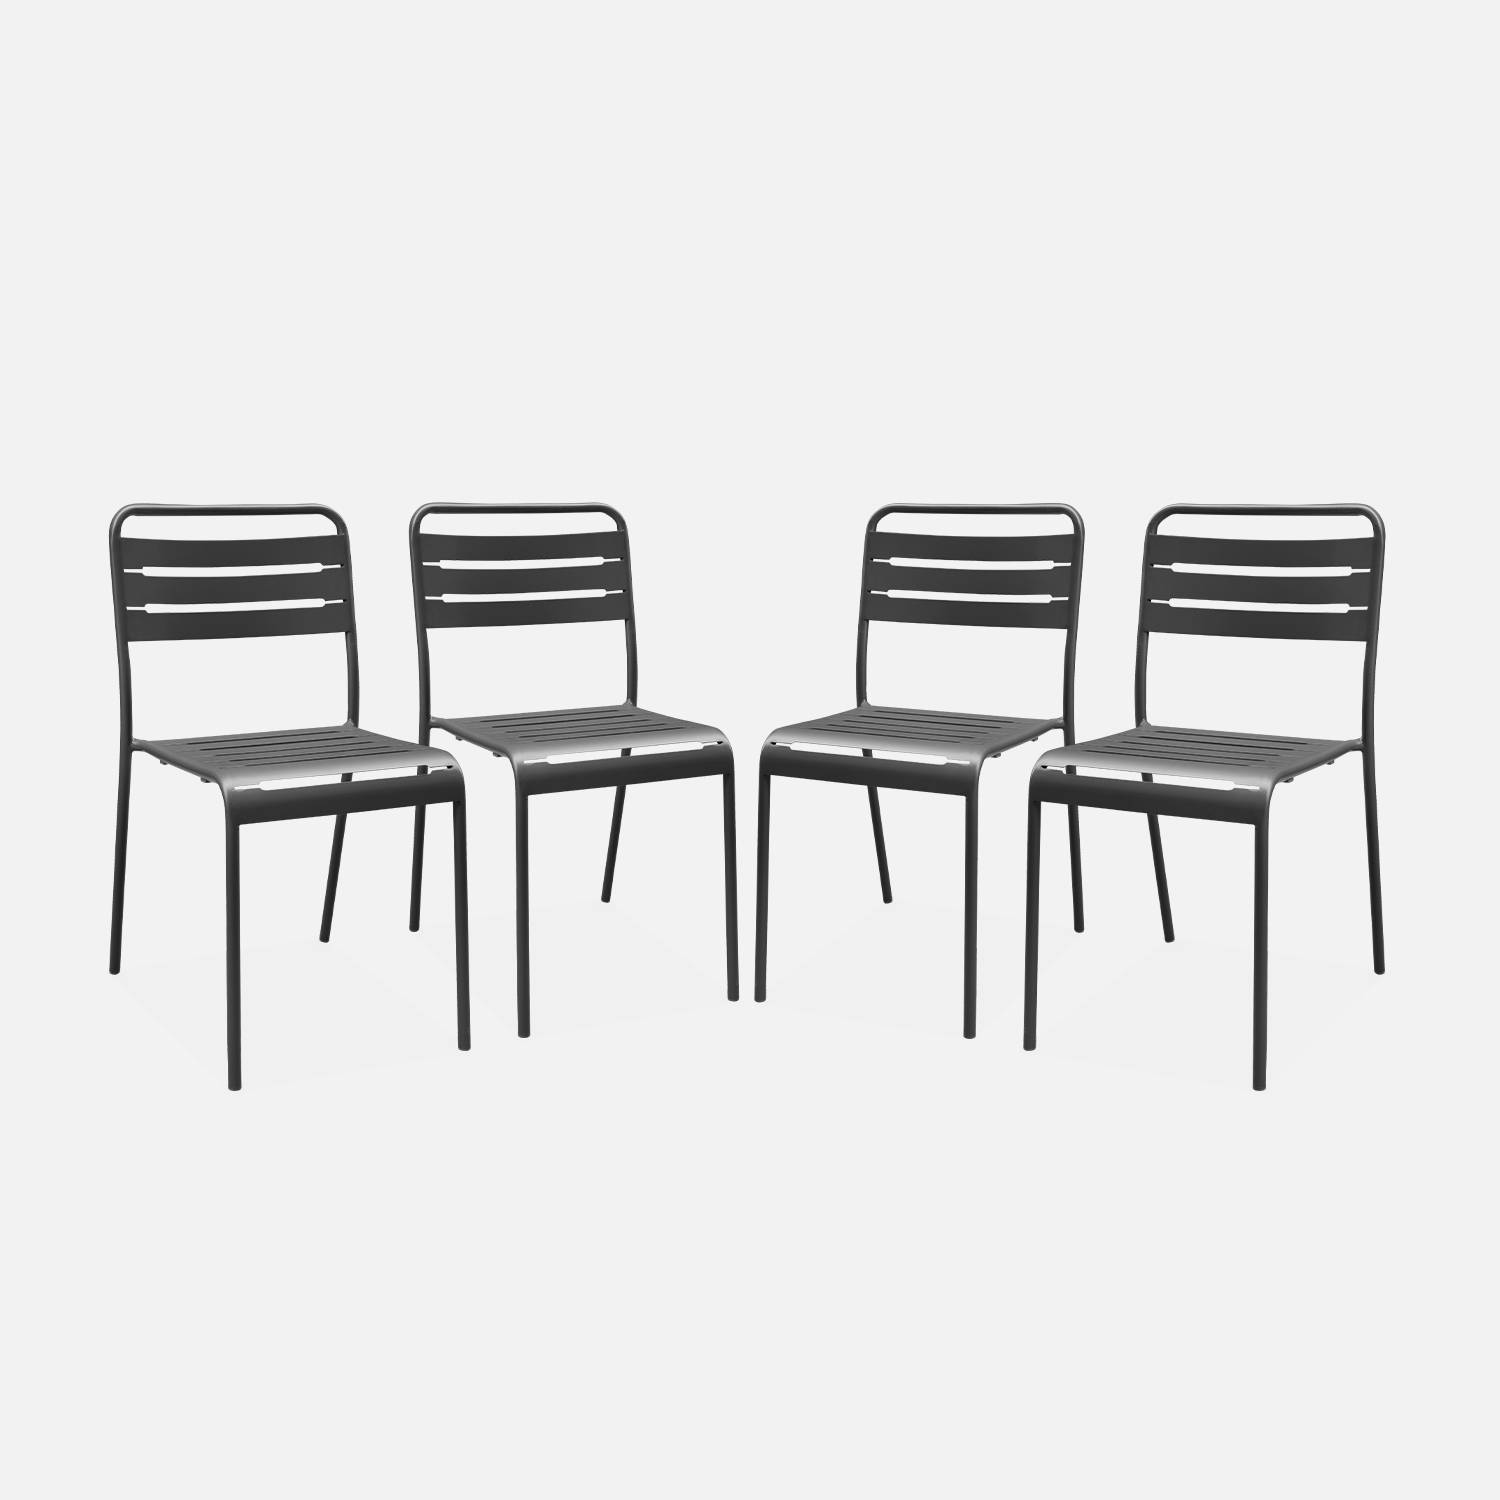 Set of 4 slatted stackable metal garden chairs, Anthracite | sweeek